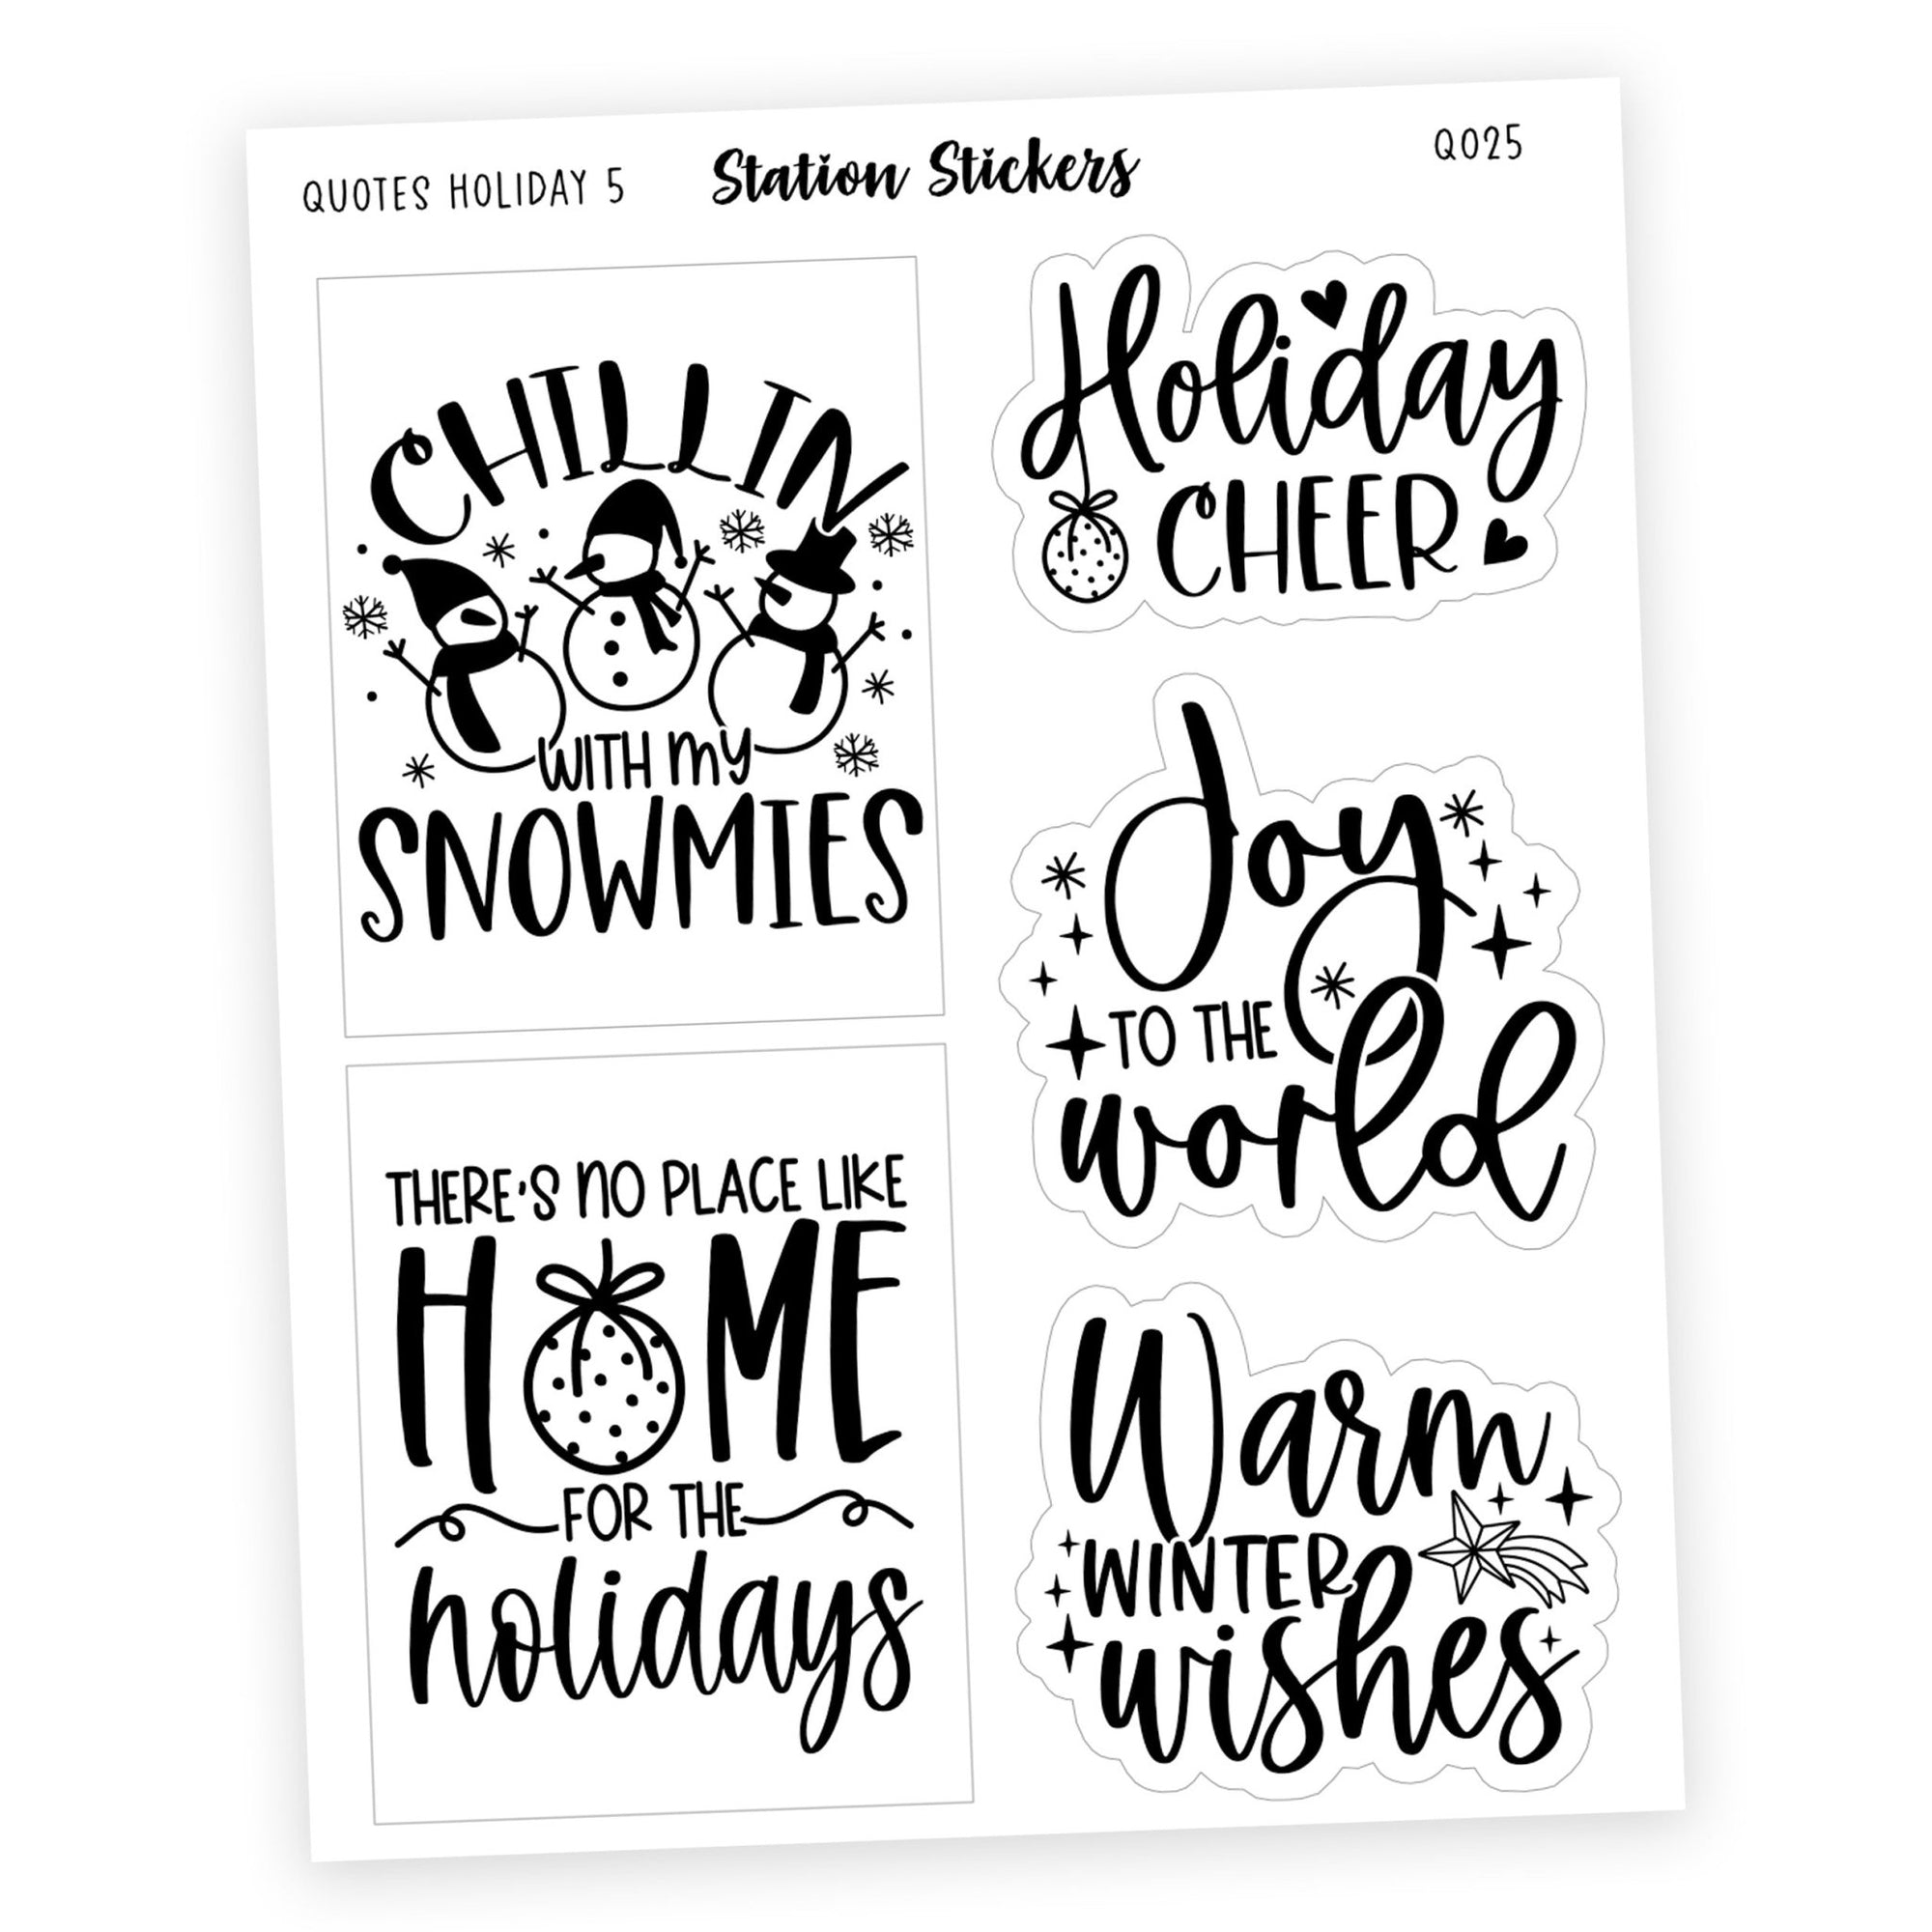 QUOTES • HOLIDAY 5 - Station Stickers